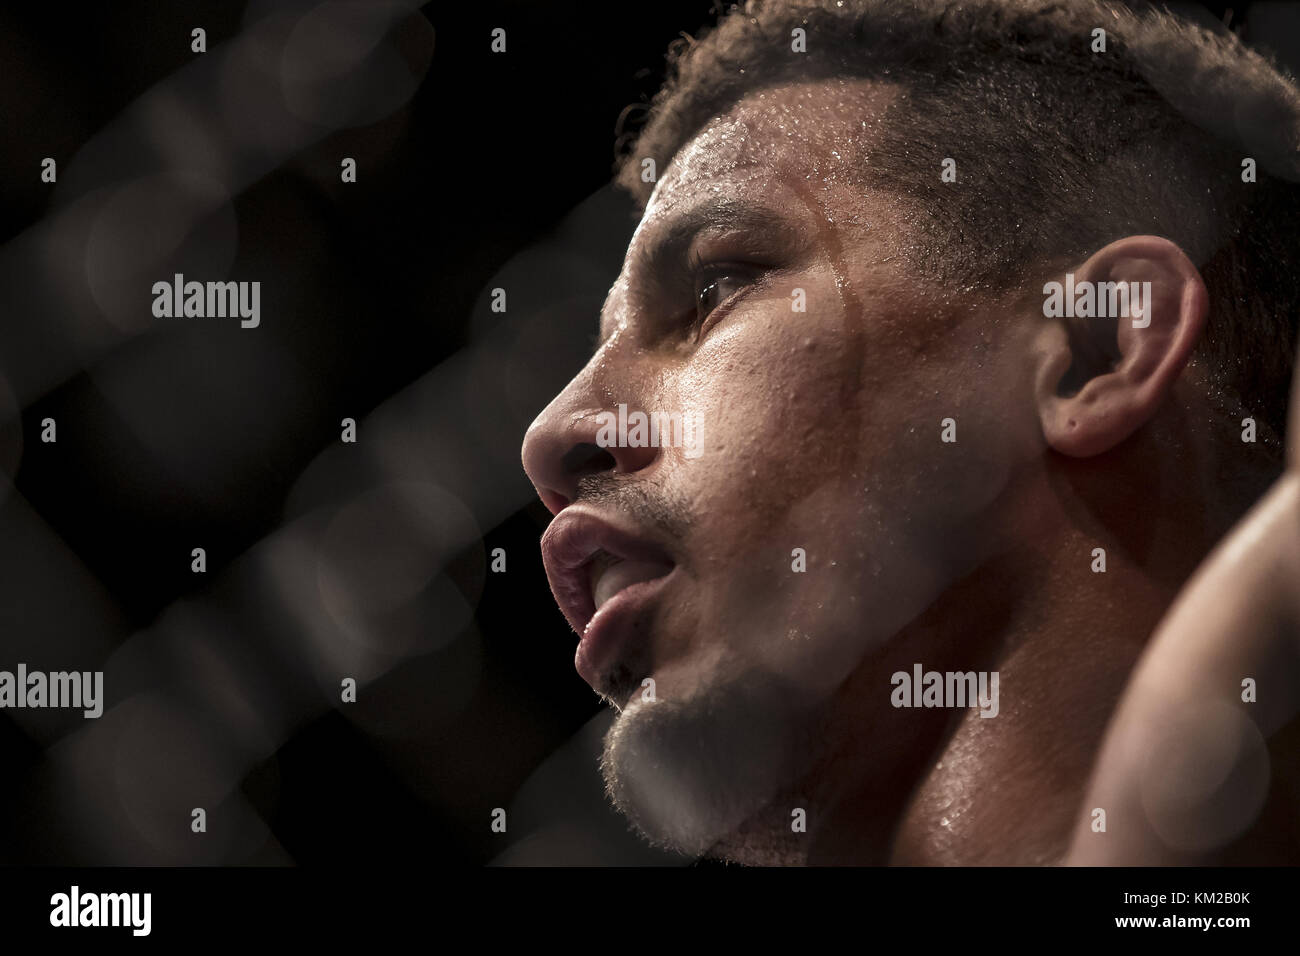 Detroit, Michigan, USA. 2nd Dec, 2017. September 16, 2017: Drakkar Klose takes a minute to recover after being poked in the eye by David Teymur during UFC 218 at Little Caesars Arena in Detroit, Michigan. Credit: Scott Taetsch/ZUMA Wire/Alamy Live News Stock Photo